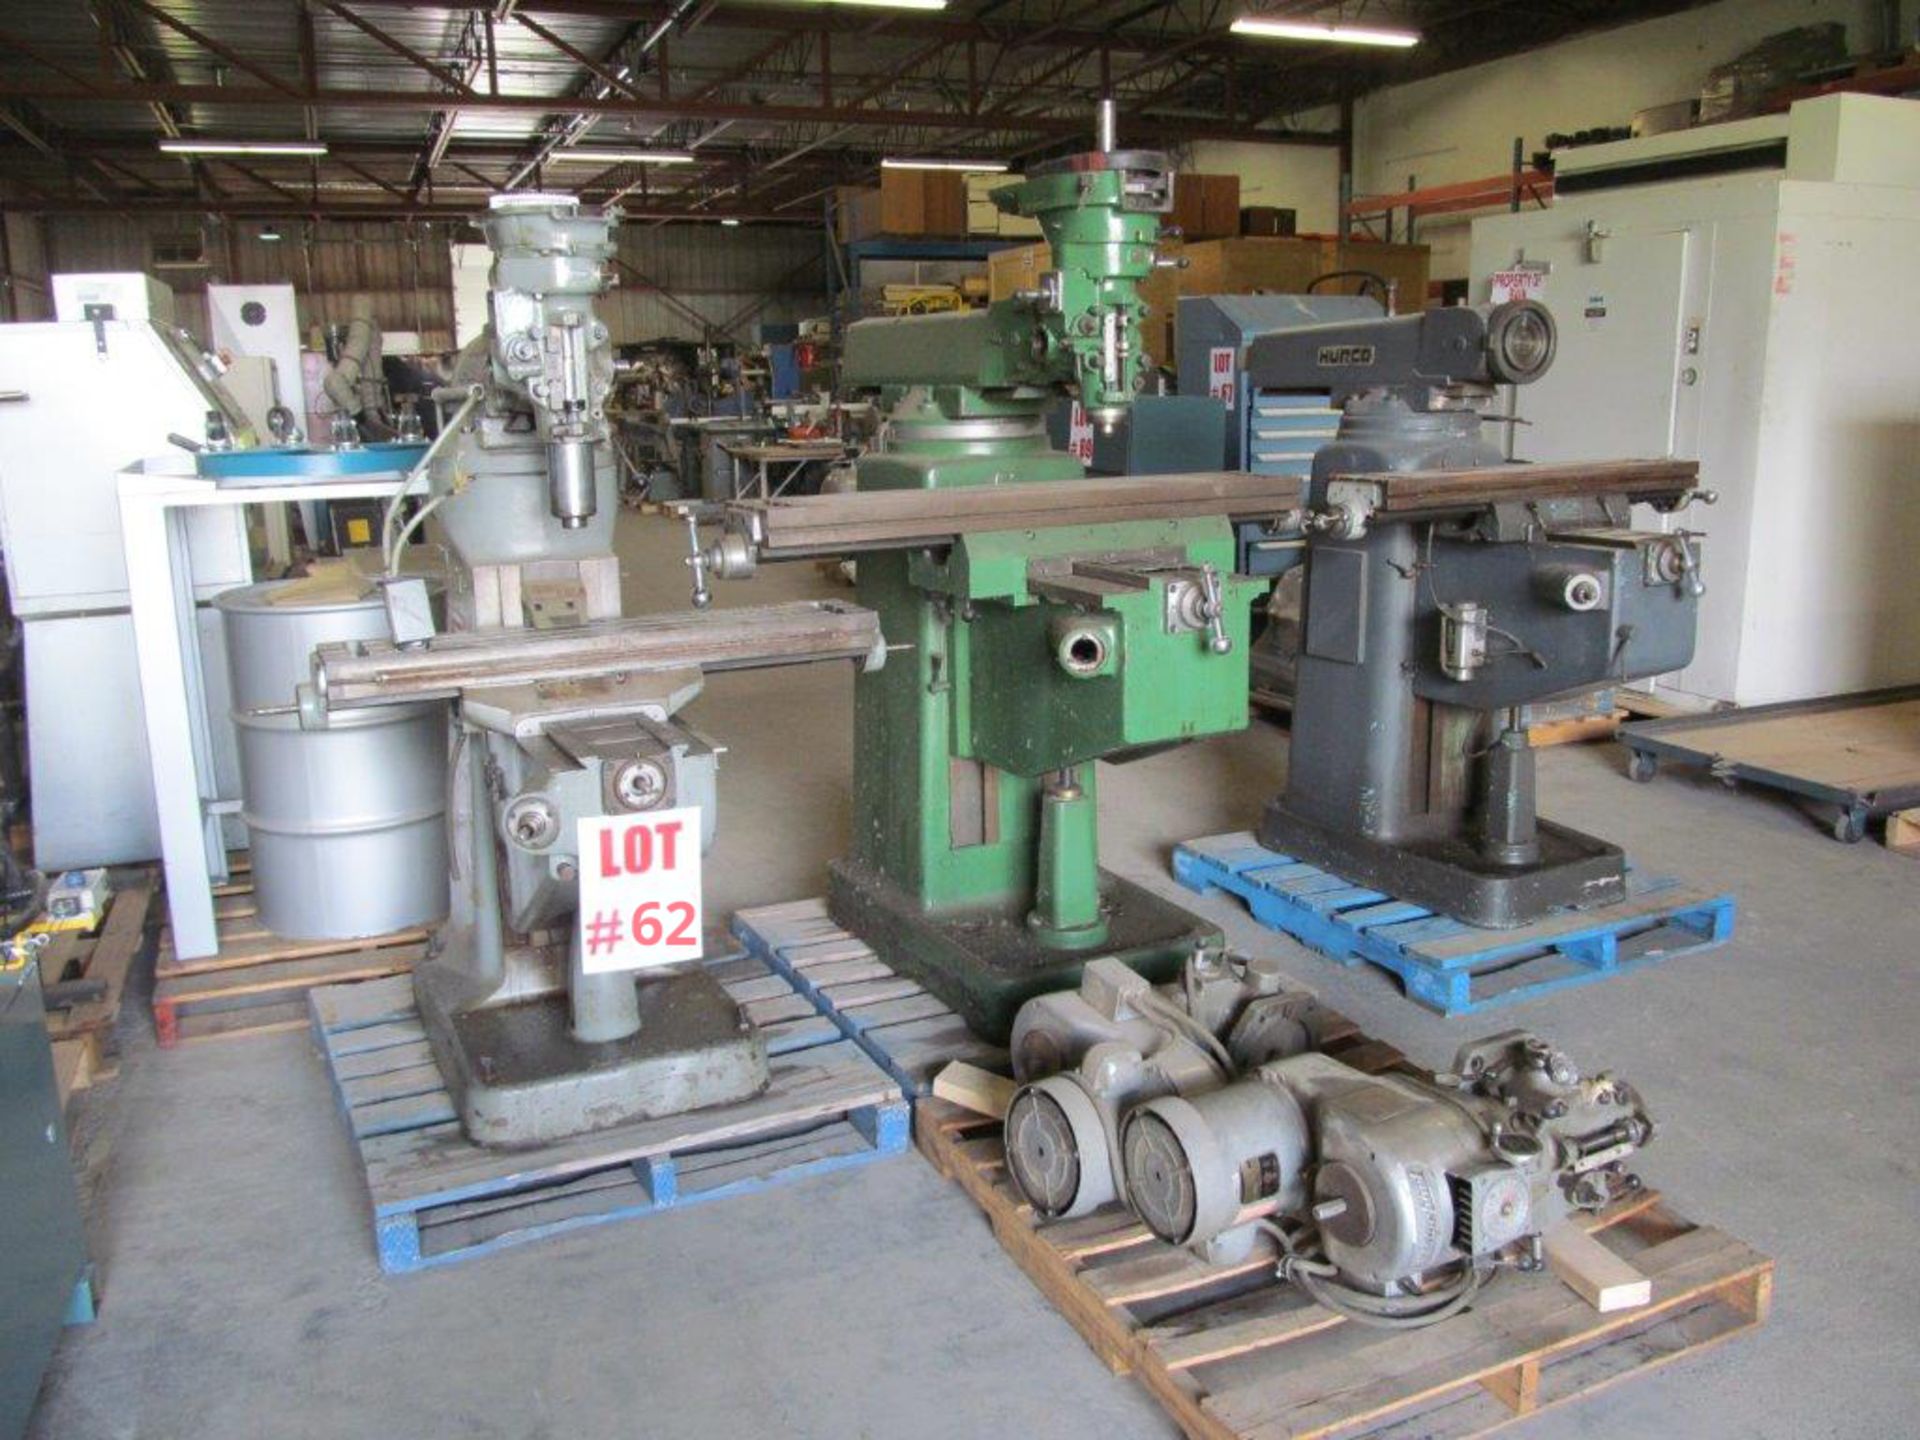 LOT CONSISTING OF (3) TURRET MILLS & (2) VARIABLE SPEED MILLING HEADS, SOLD AS (1) LOT - Image 9 of 9